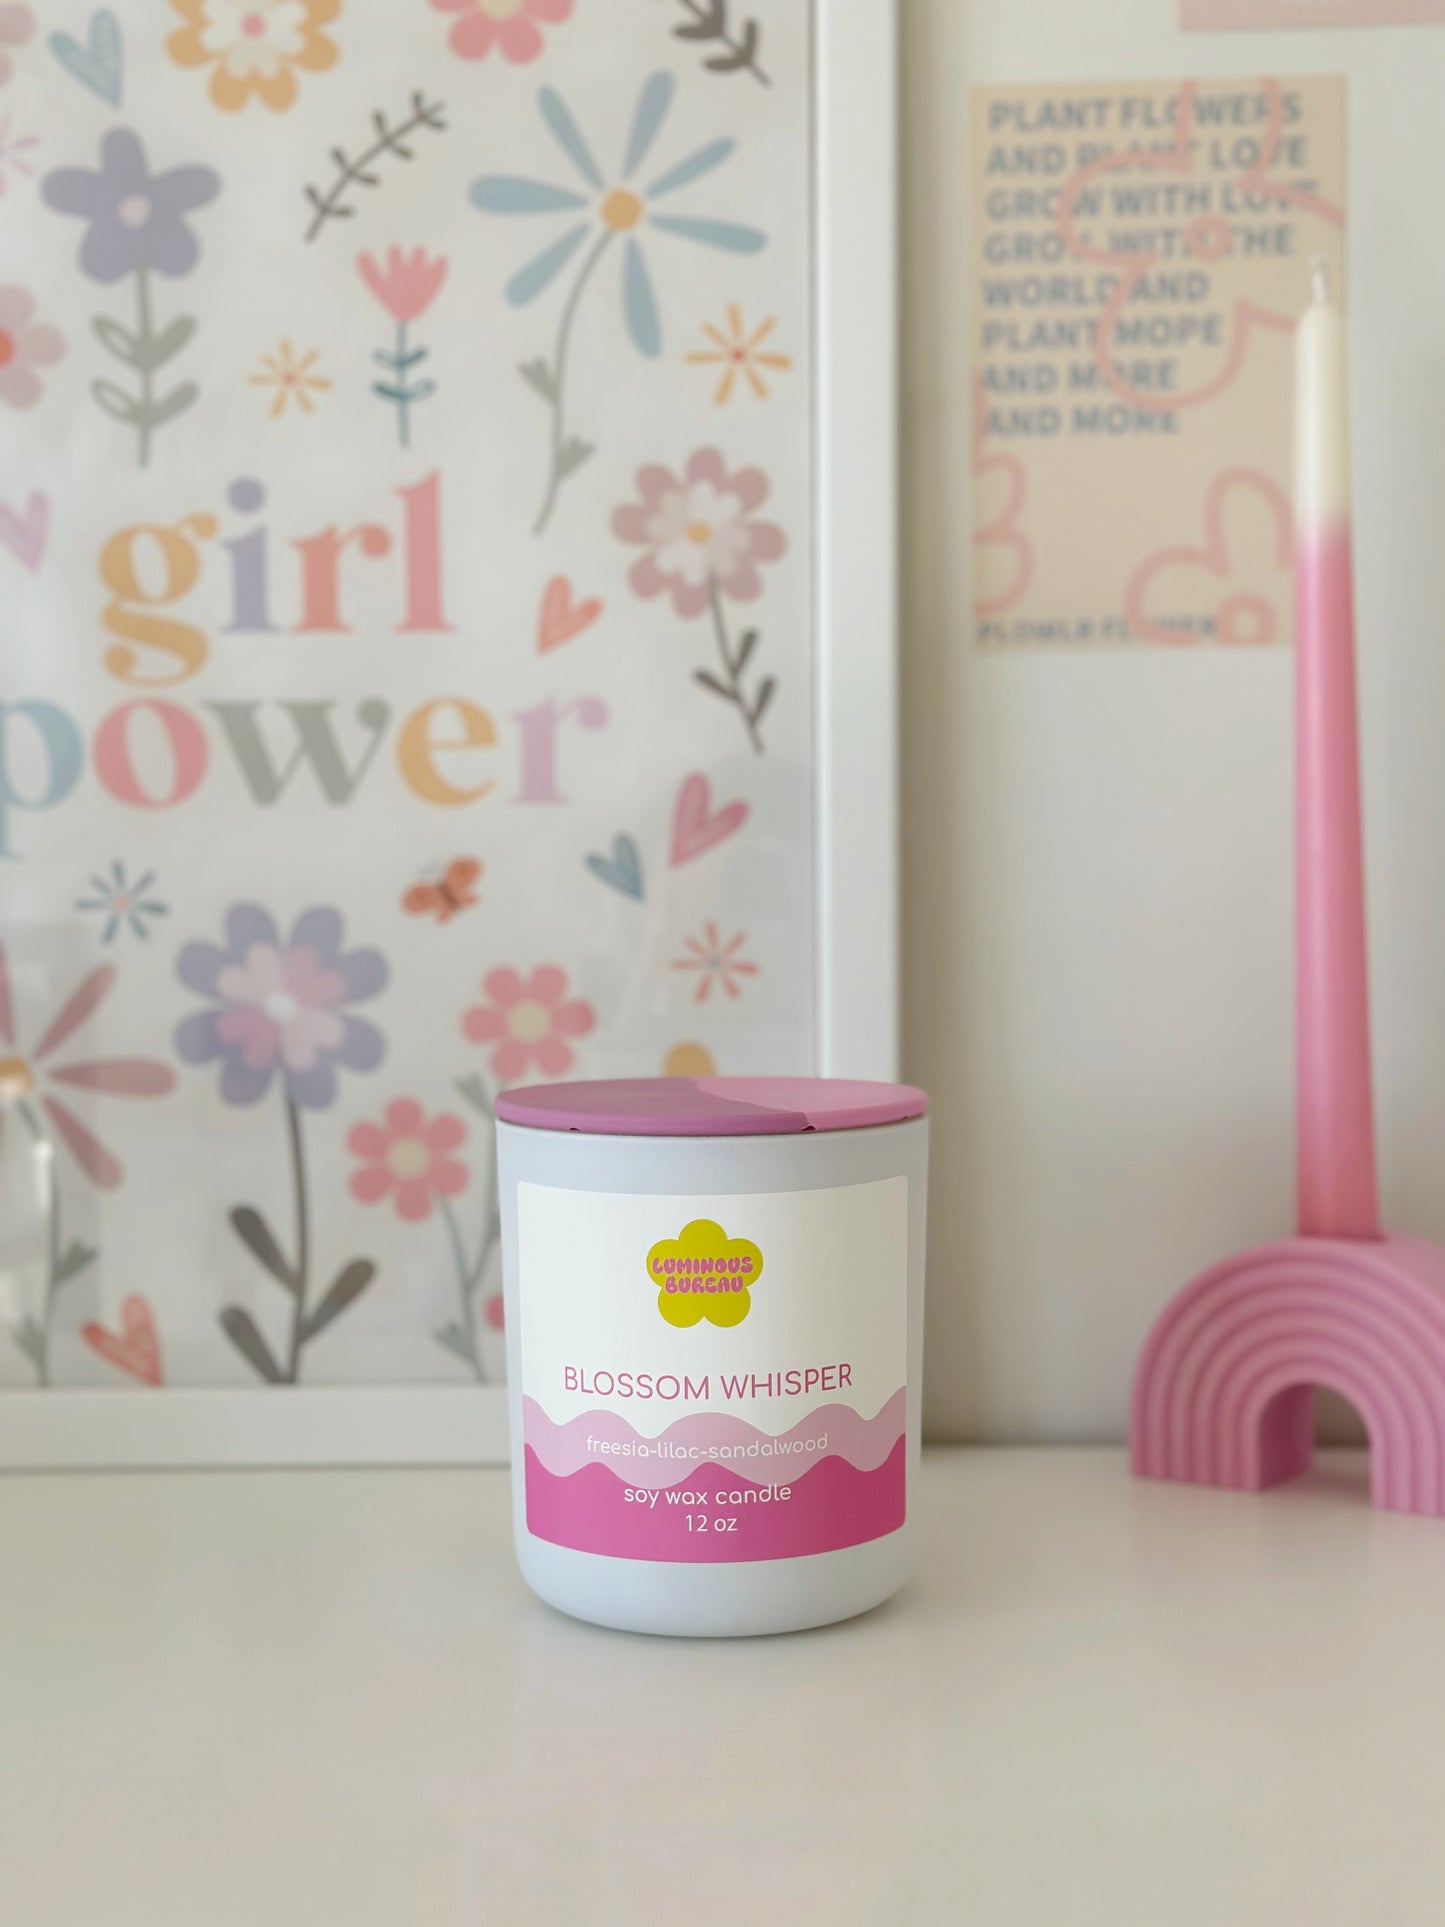 Blossom Whisper Soy Wax Candle with Crackling Wooden Wick